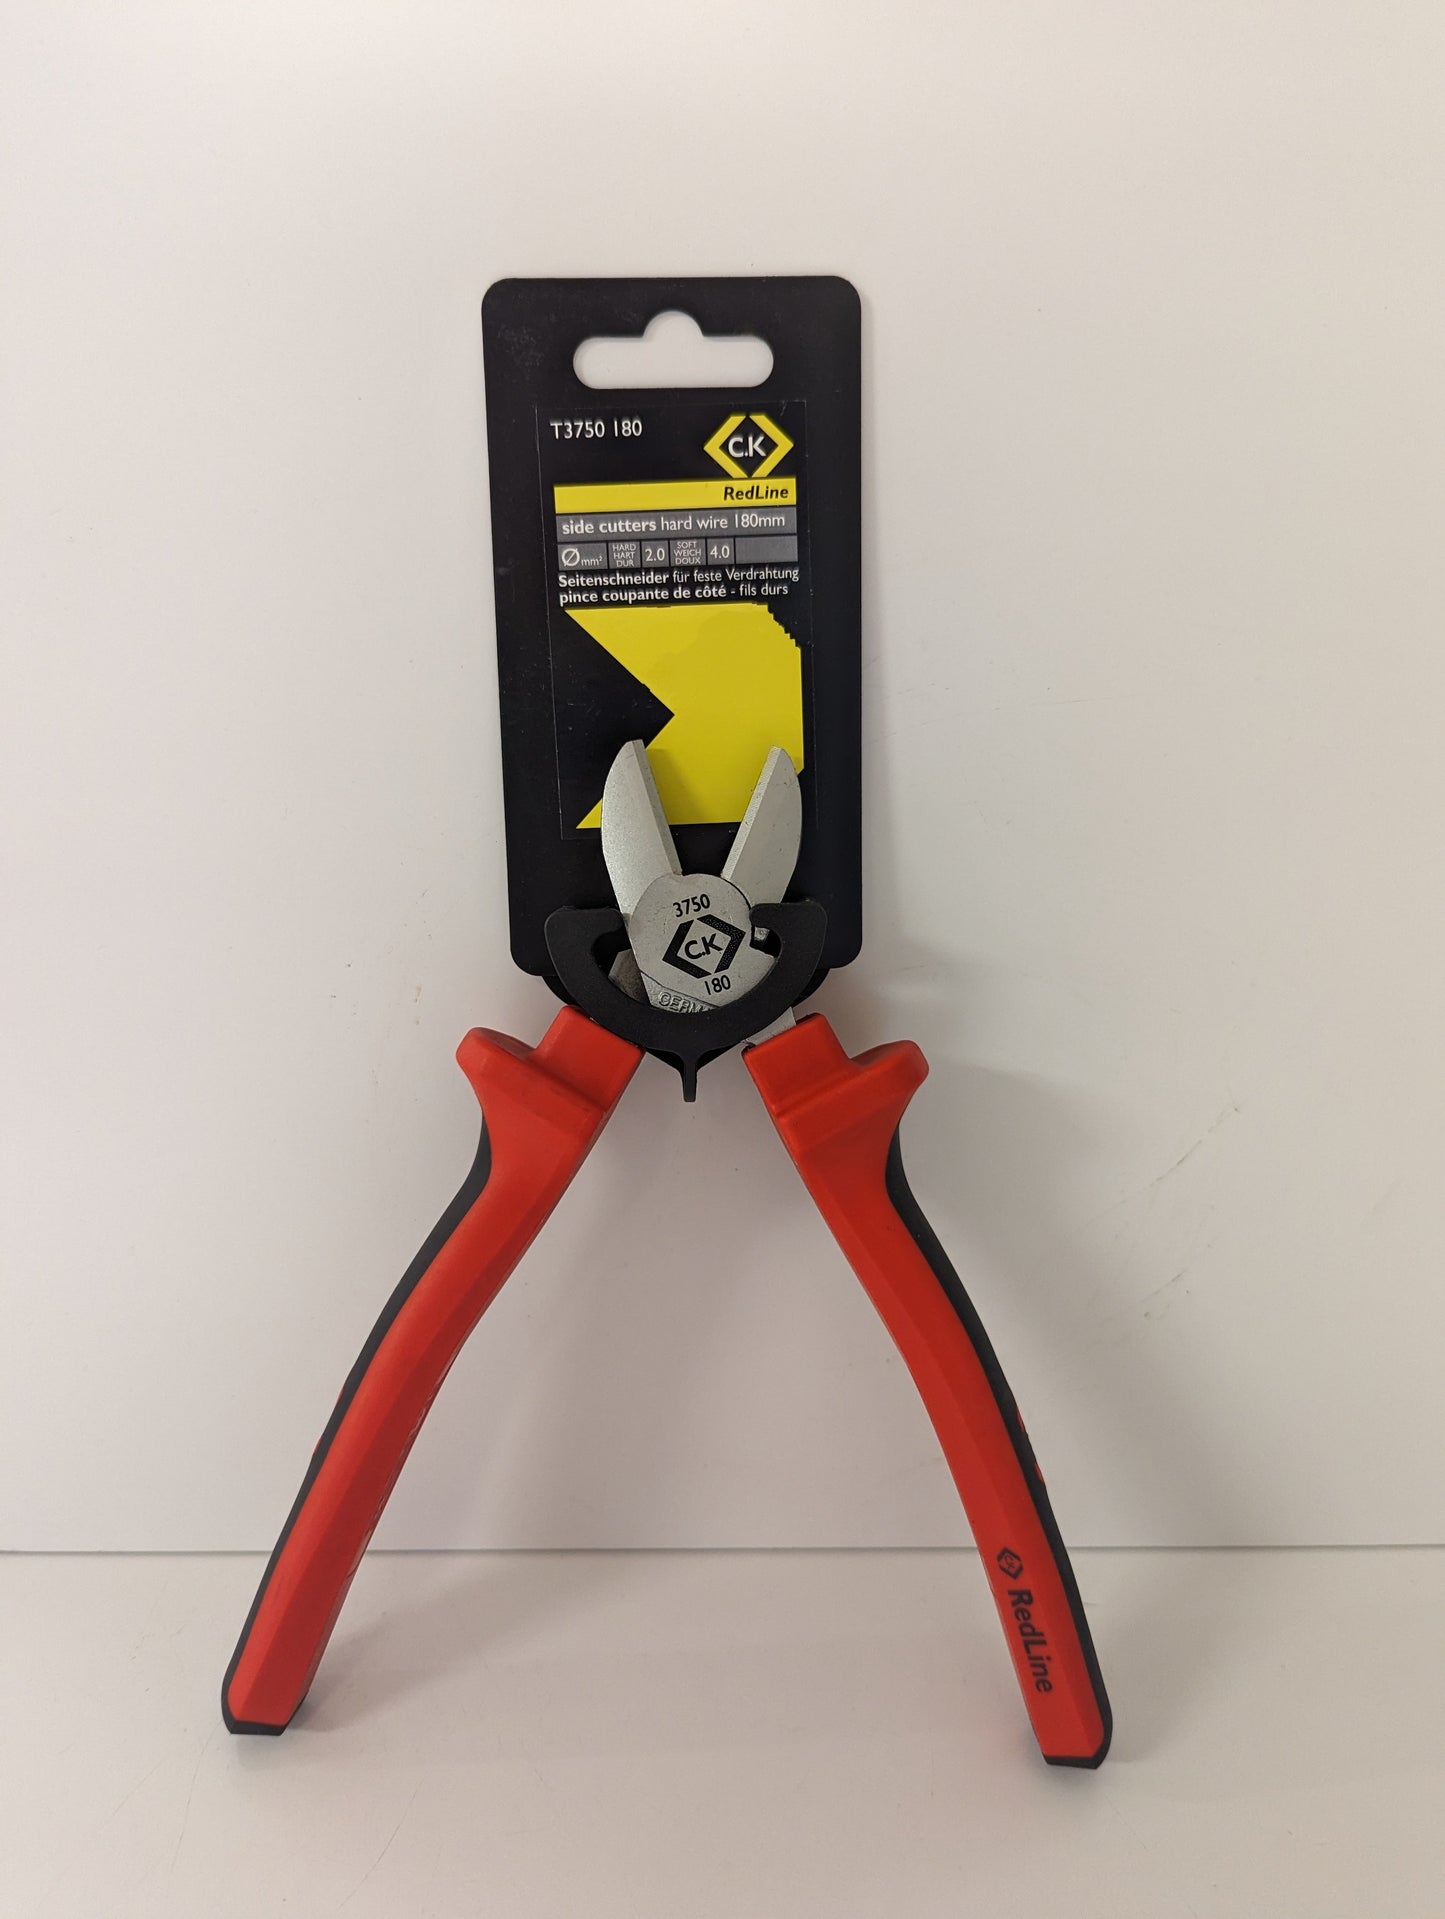 C.K. Red line 6" Hard Wire side Cutters